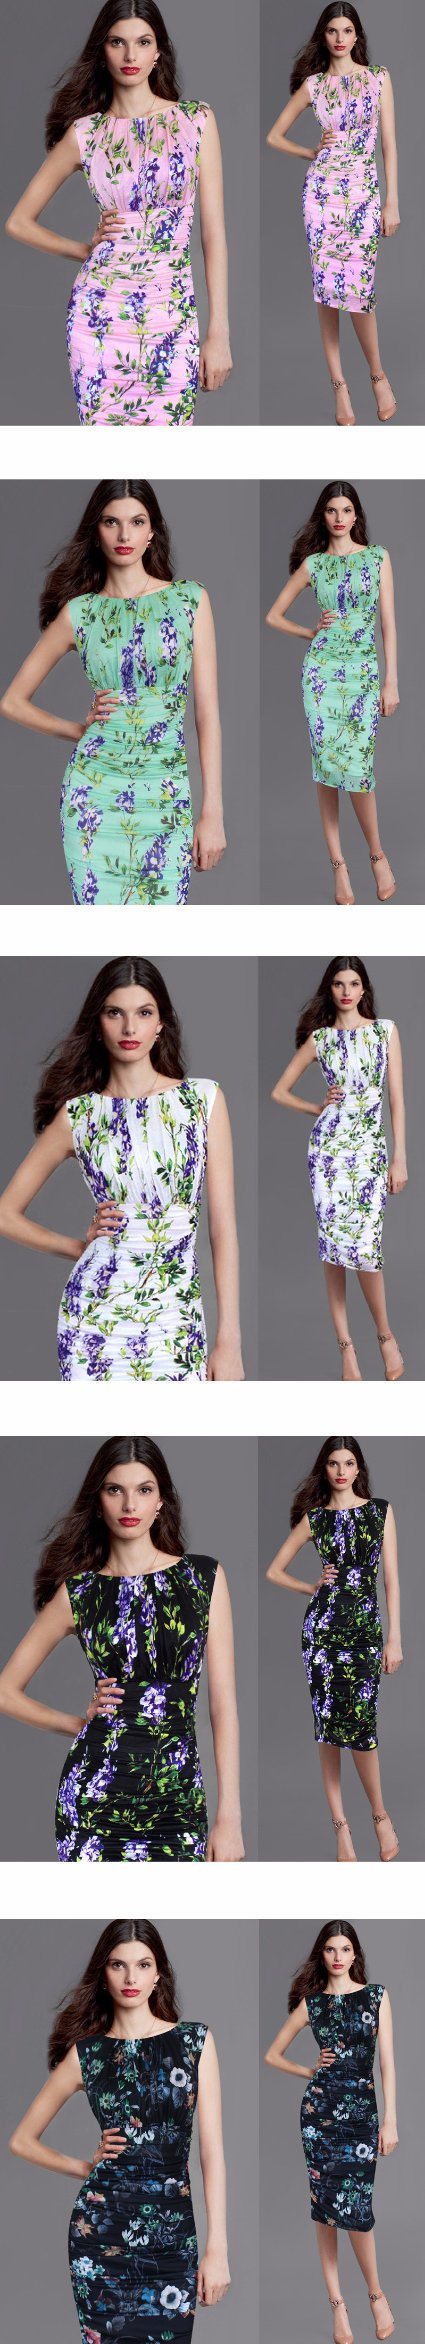 Women Summer Floral Printed Flower Casual Tunic Bodycon Dress Office Dress